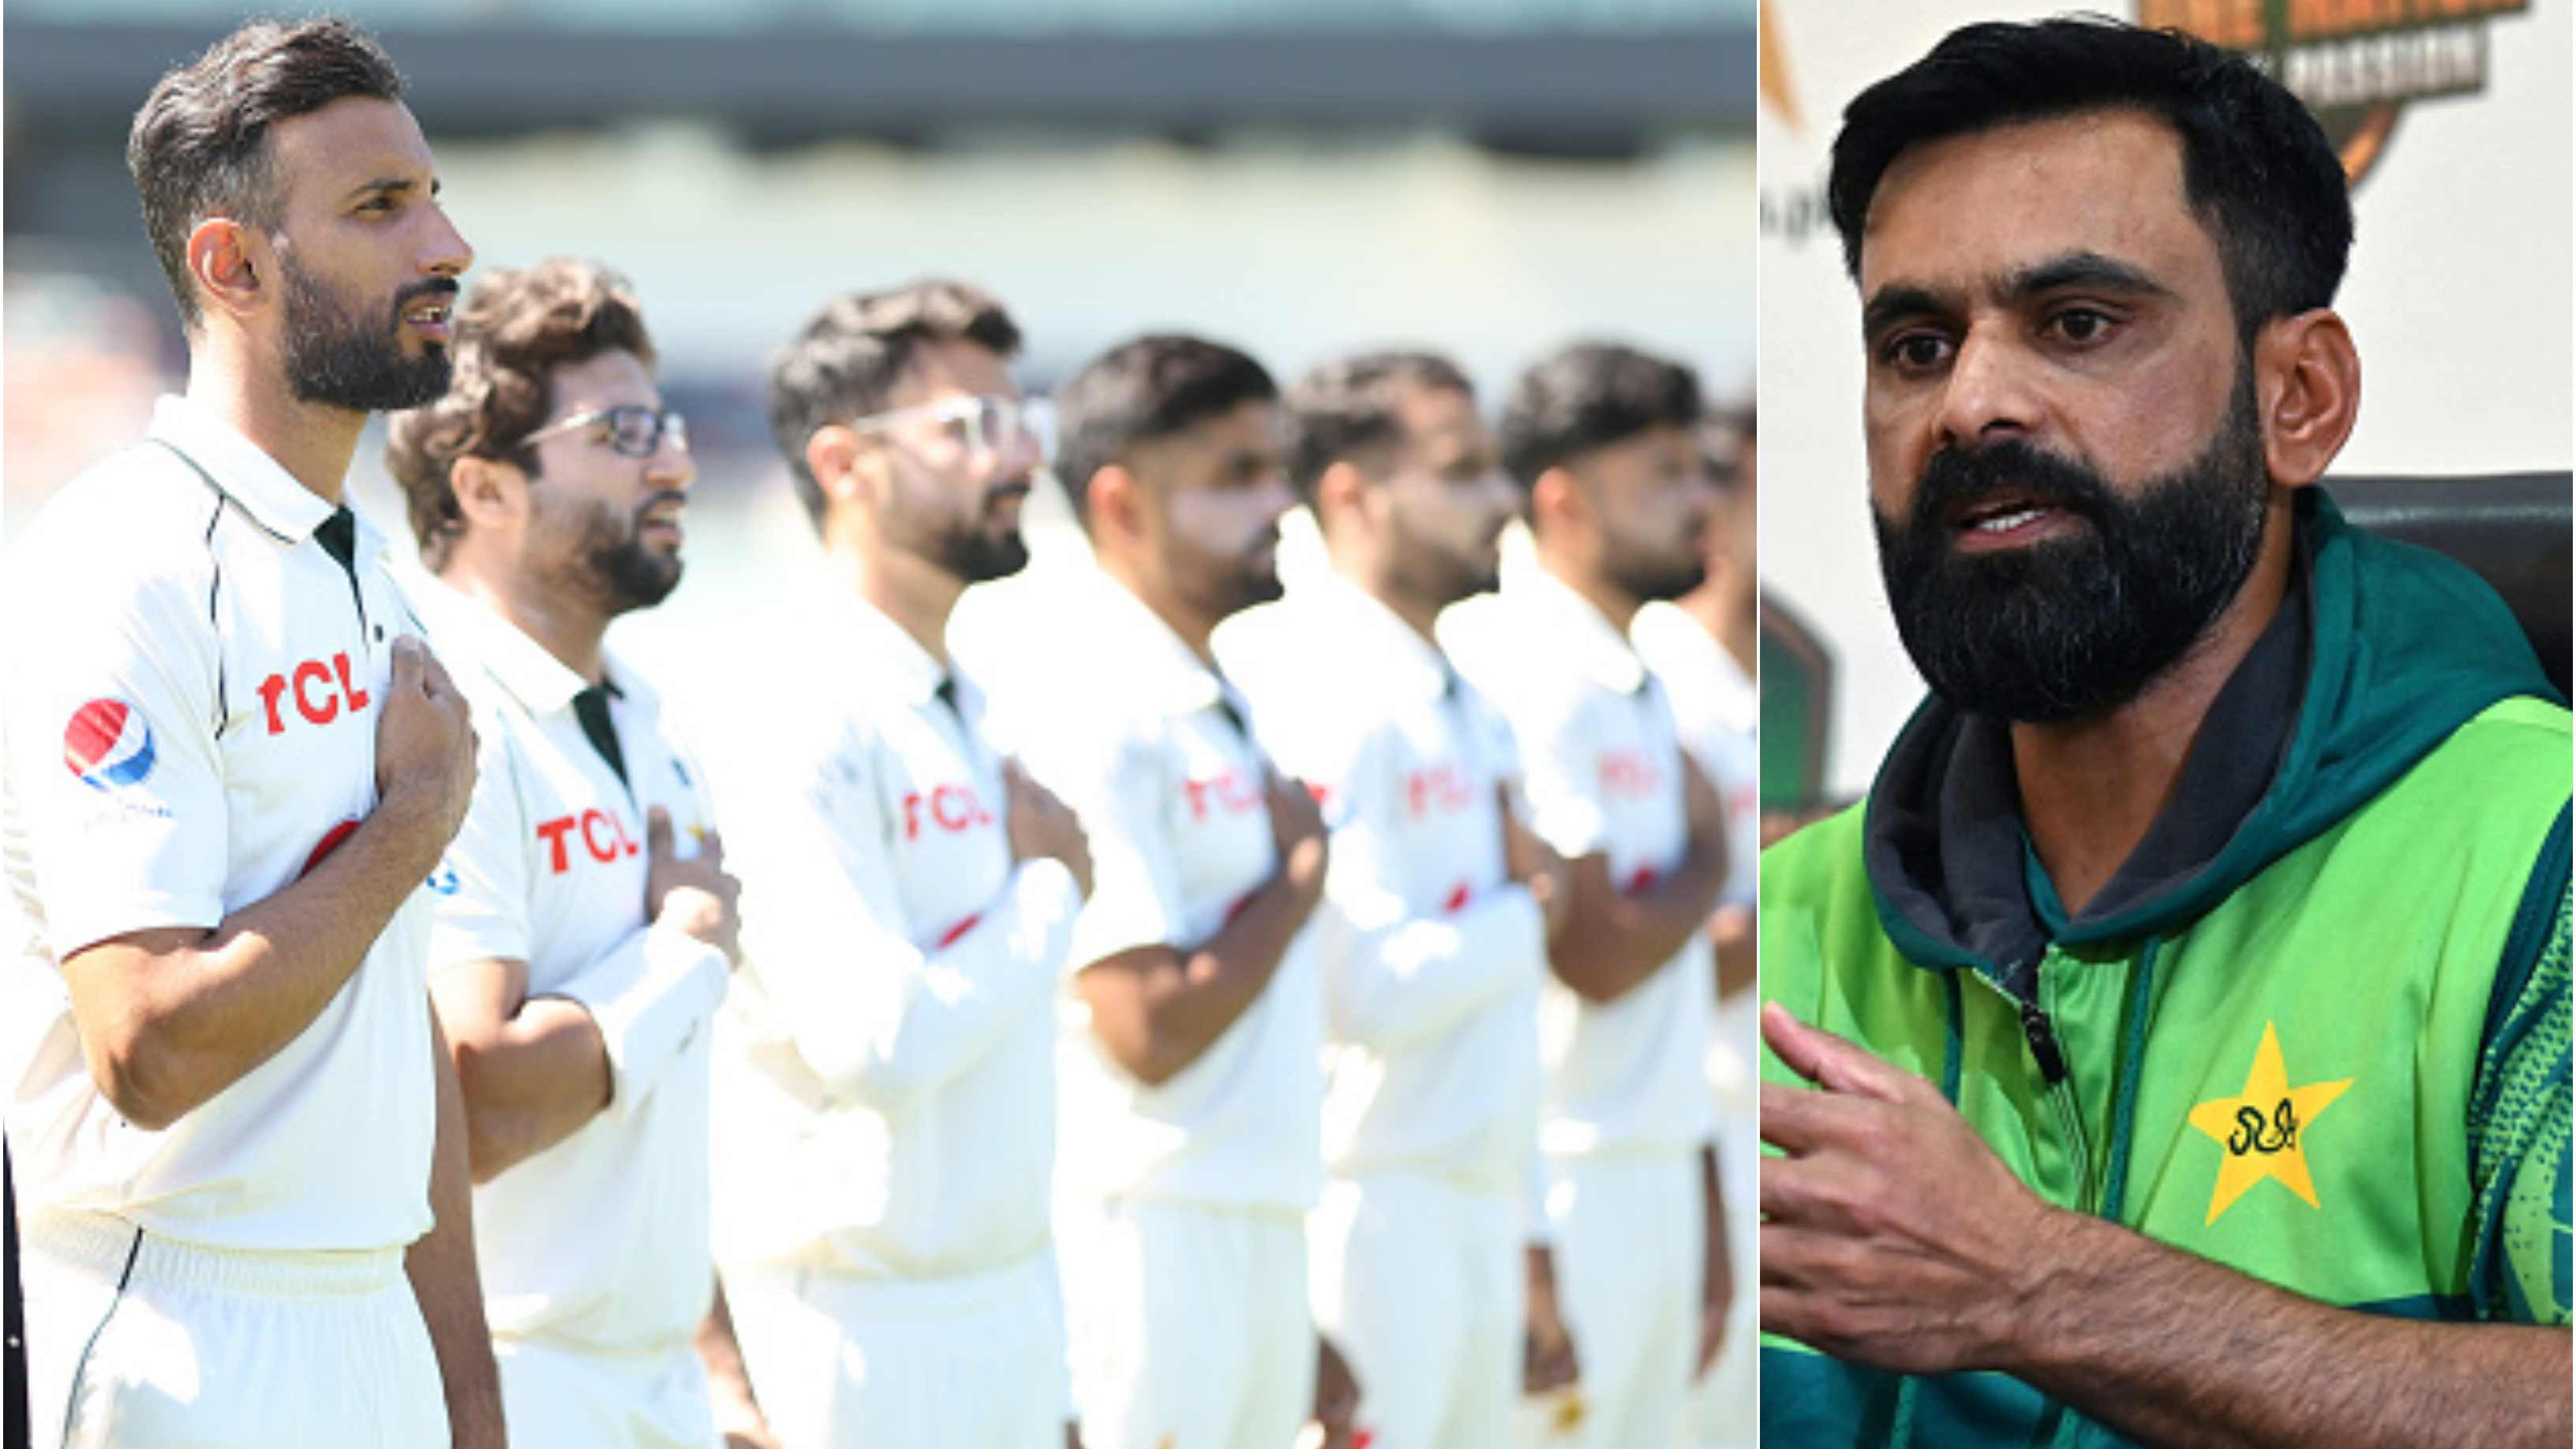 AUS v PAK 2023-24: “We’re here to beat Australia,” says Mohammad Hafeez ahead of first Test in Perth